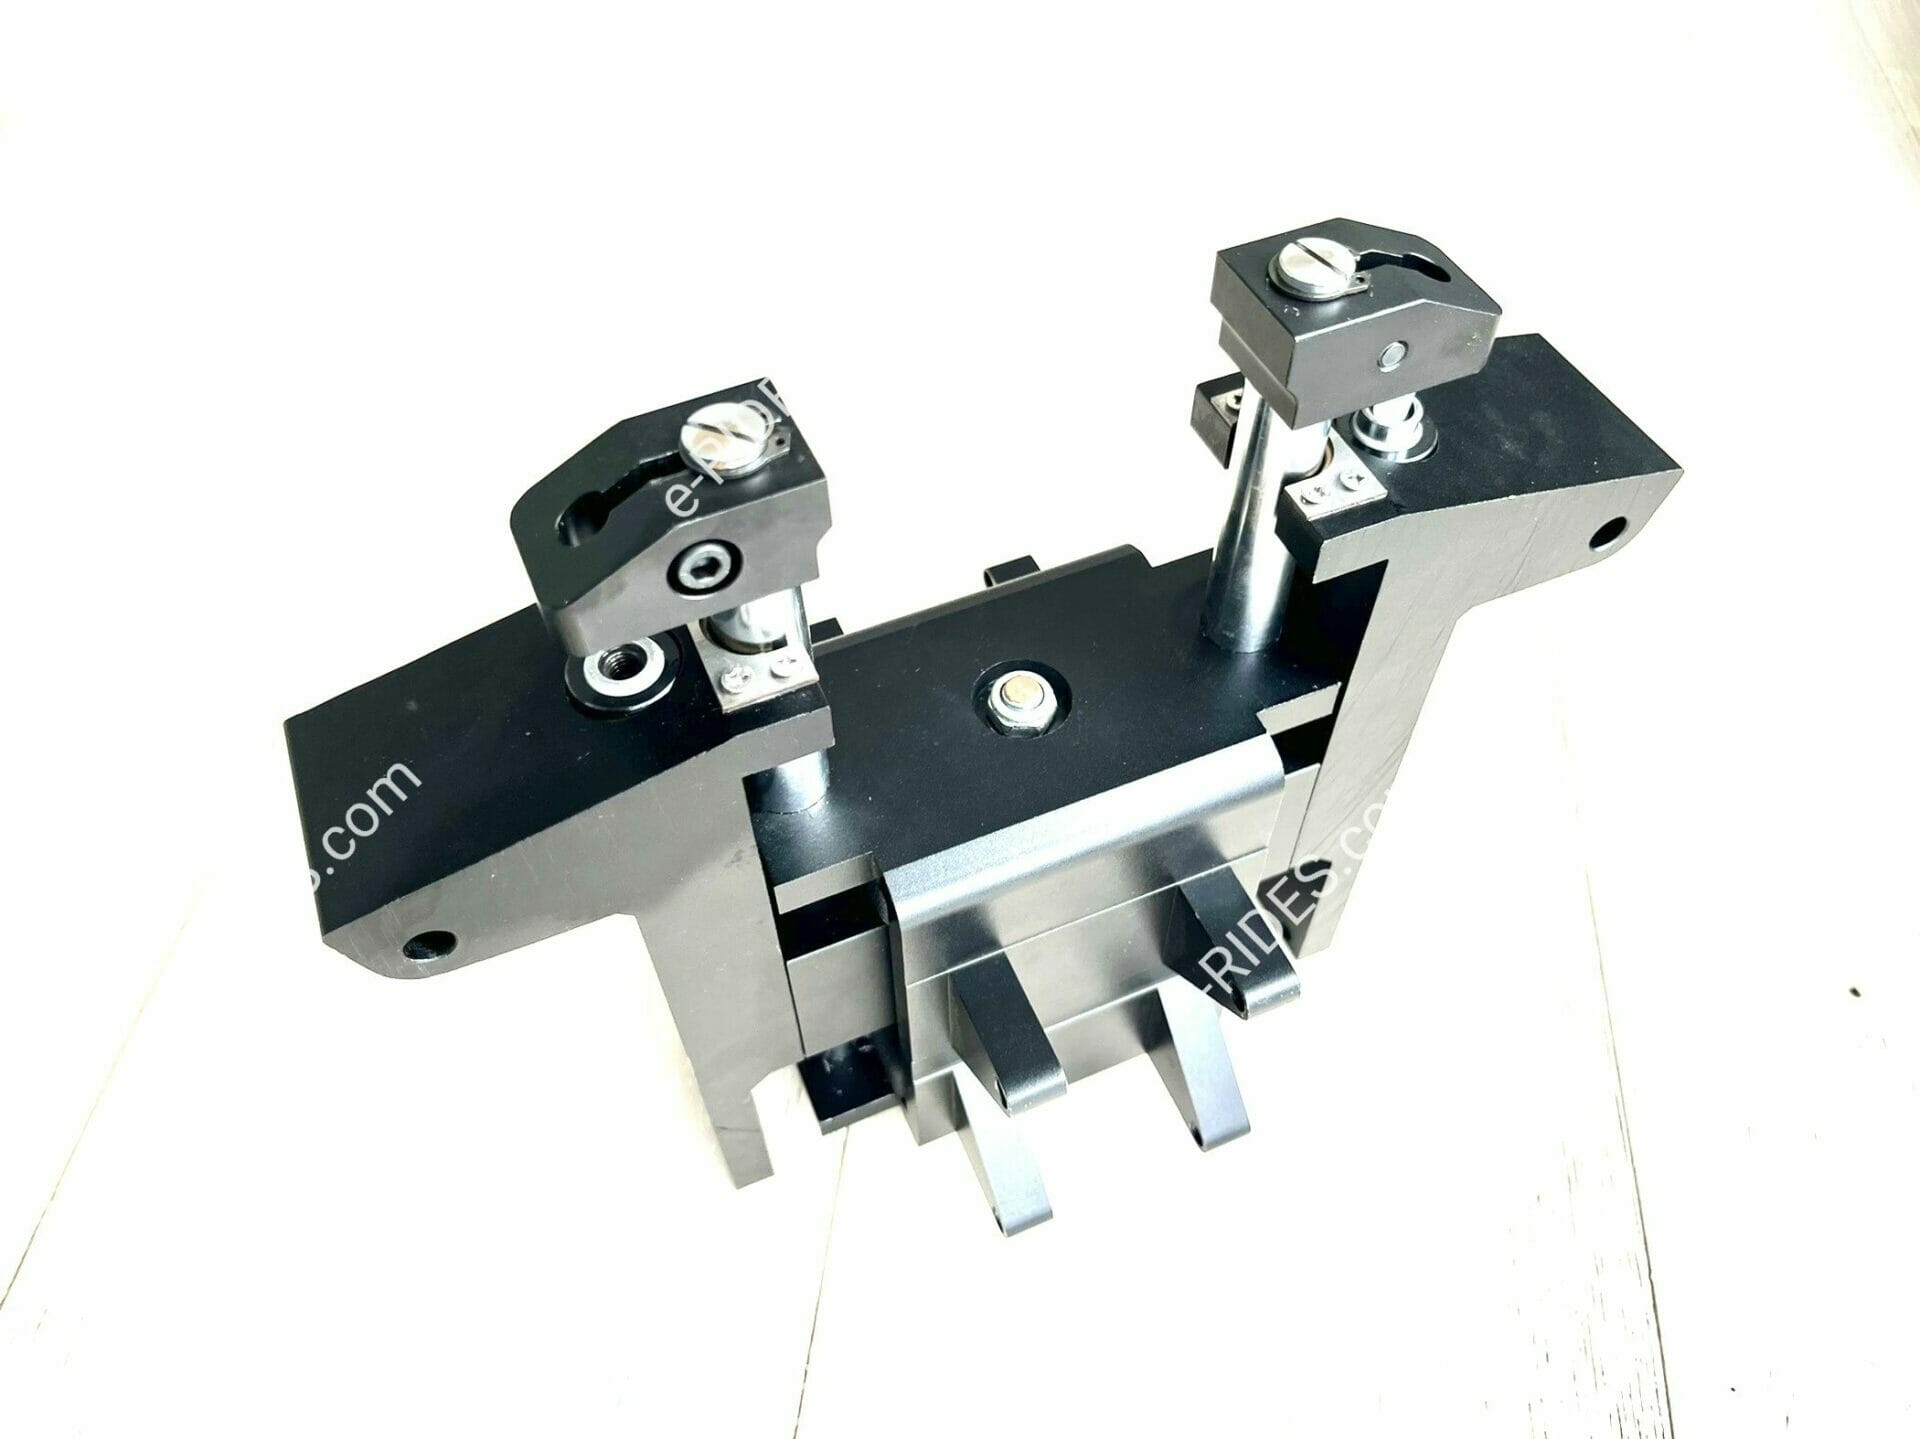 Begode (Gotway) EX Electric Unicycle Suspension Assembly